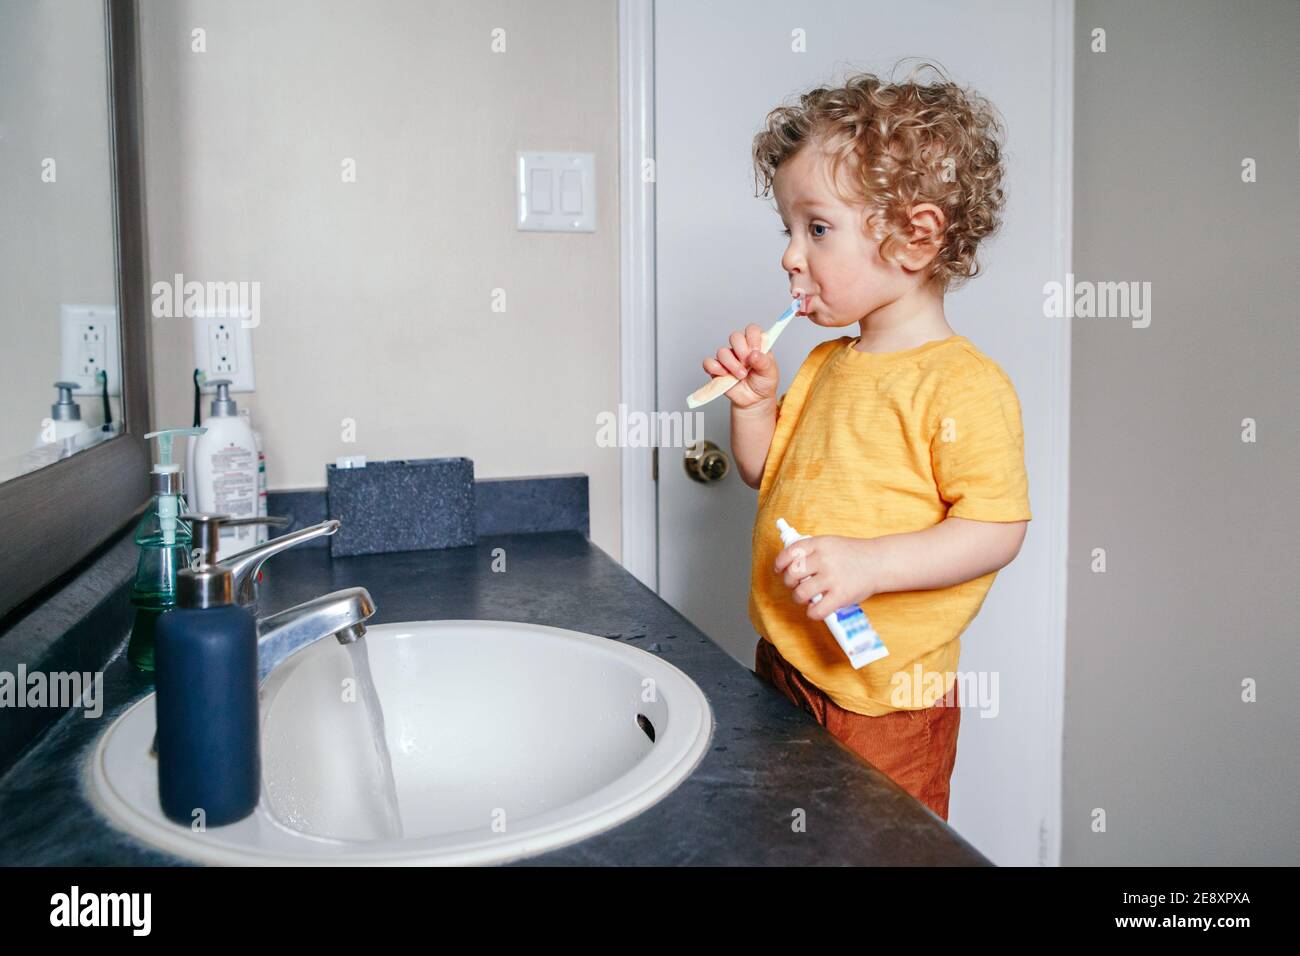 Little Caucasian boy toddler brushing teeth in bathroom at home. Health hygiene and morning routine for children. Cute funny child washing in toilet. Stock Photo